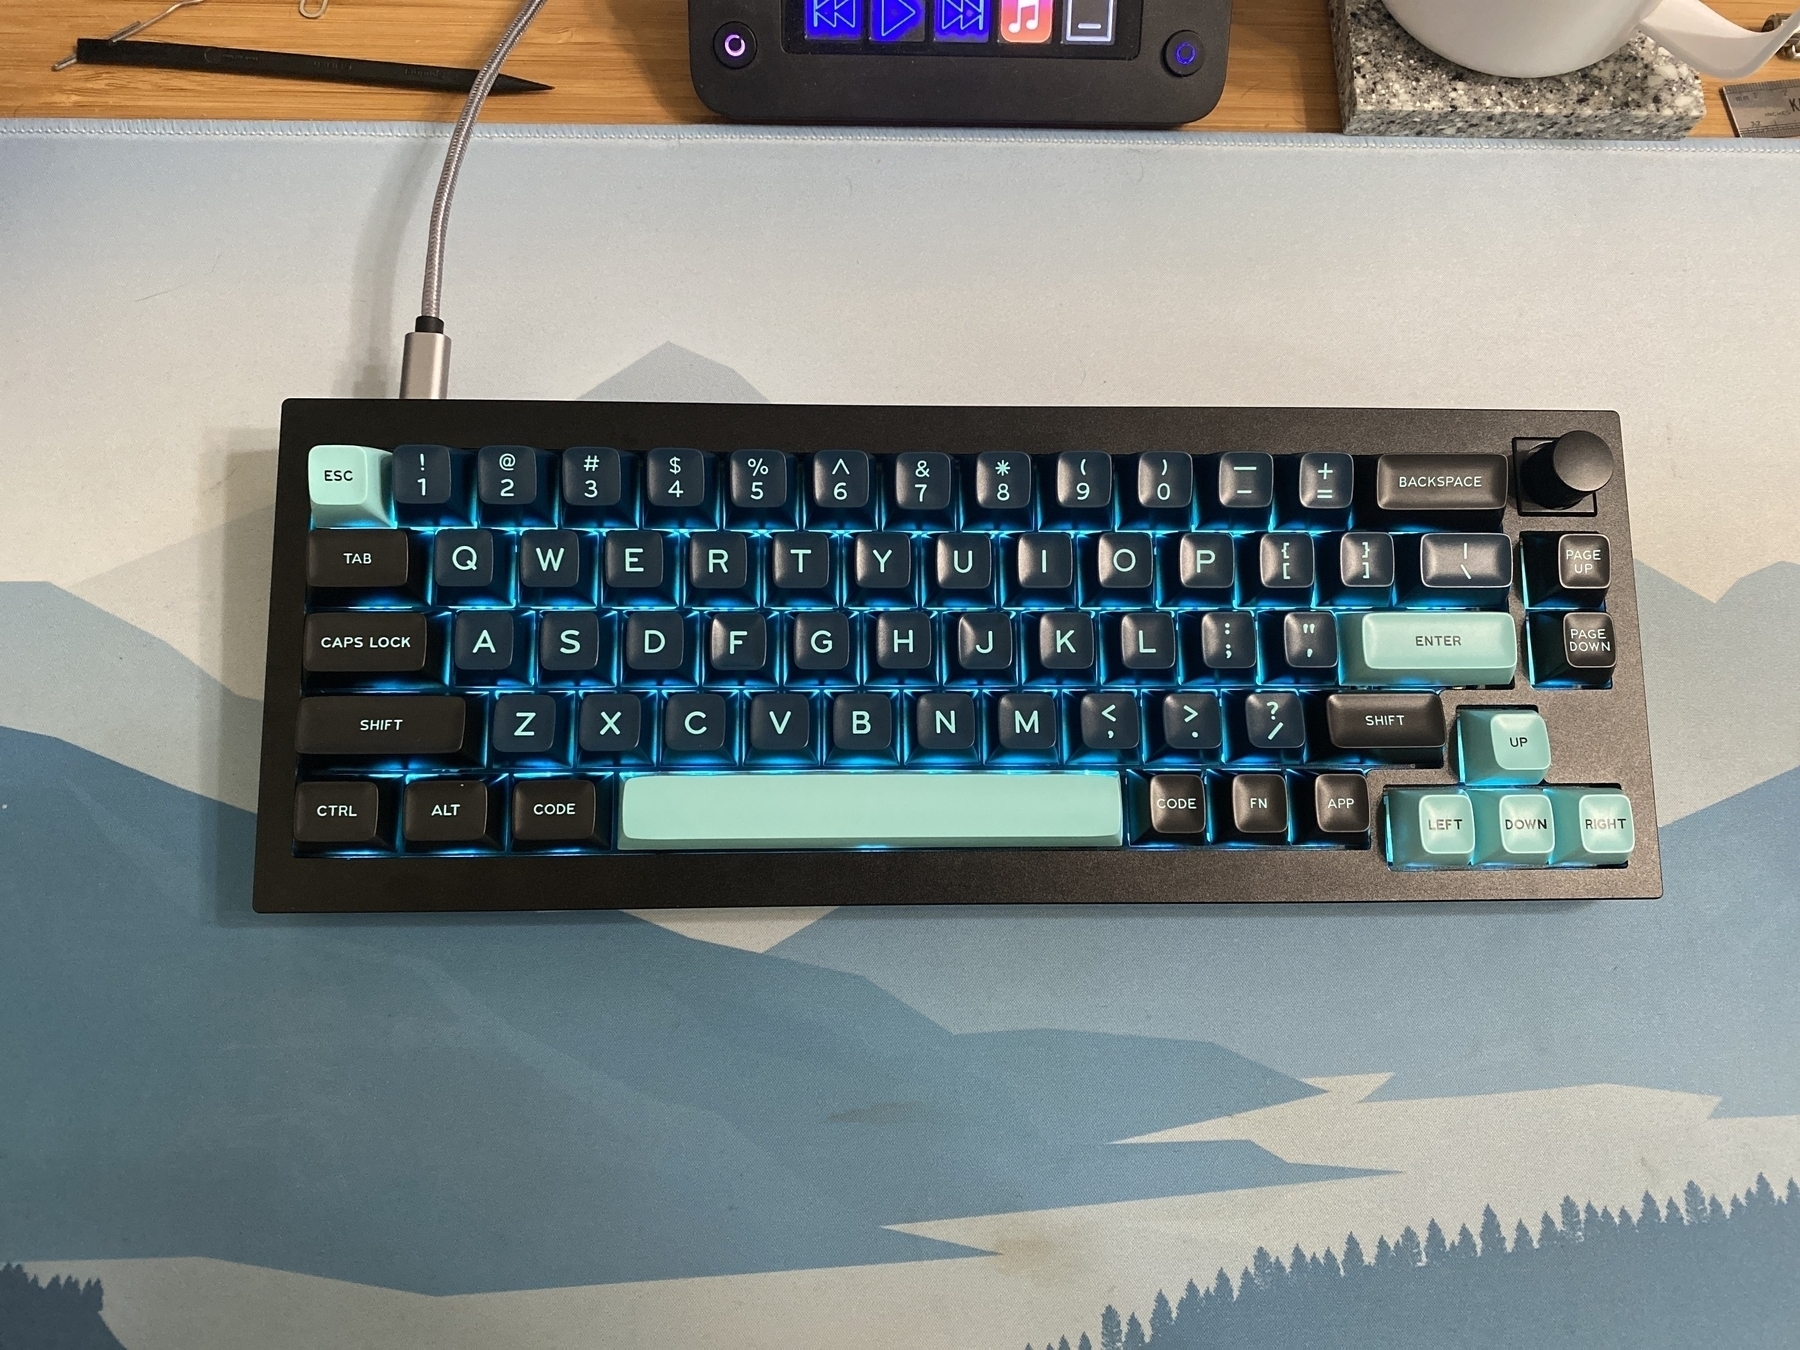 A Keychron Q2 keyboard with a turquoise backlight and teal/turquoise keycaps. Sitting on a blue lake/mountain scene deskpad.